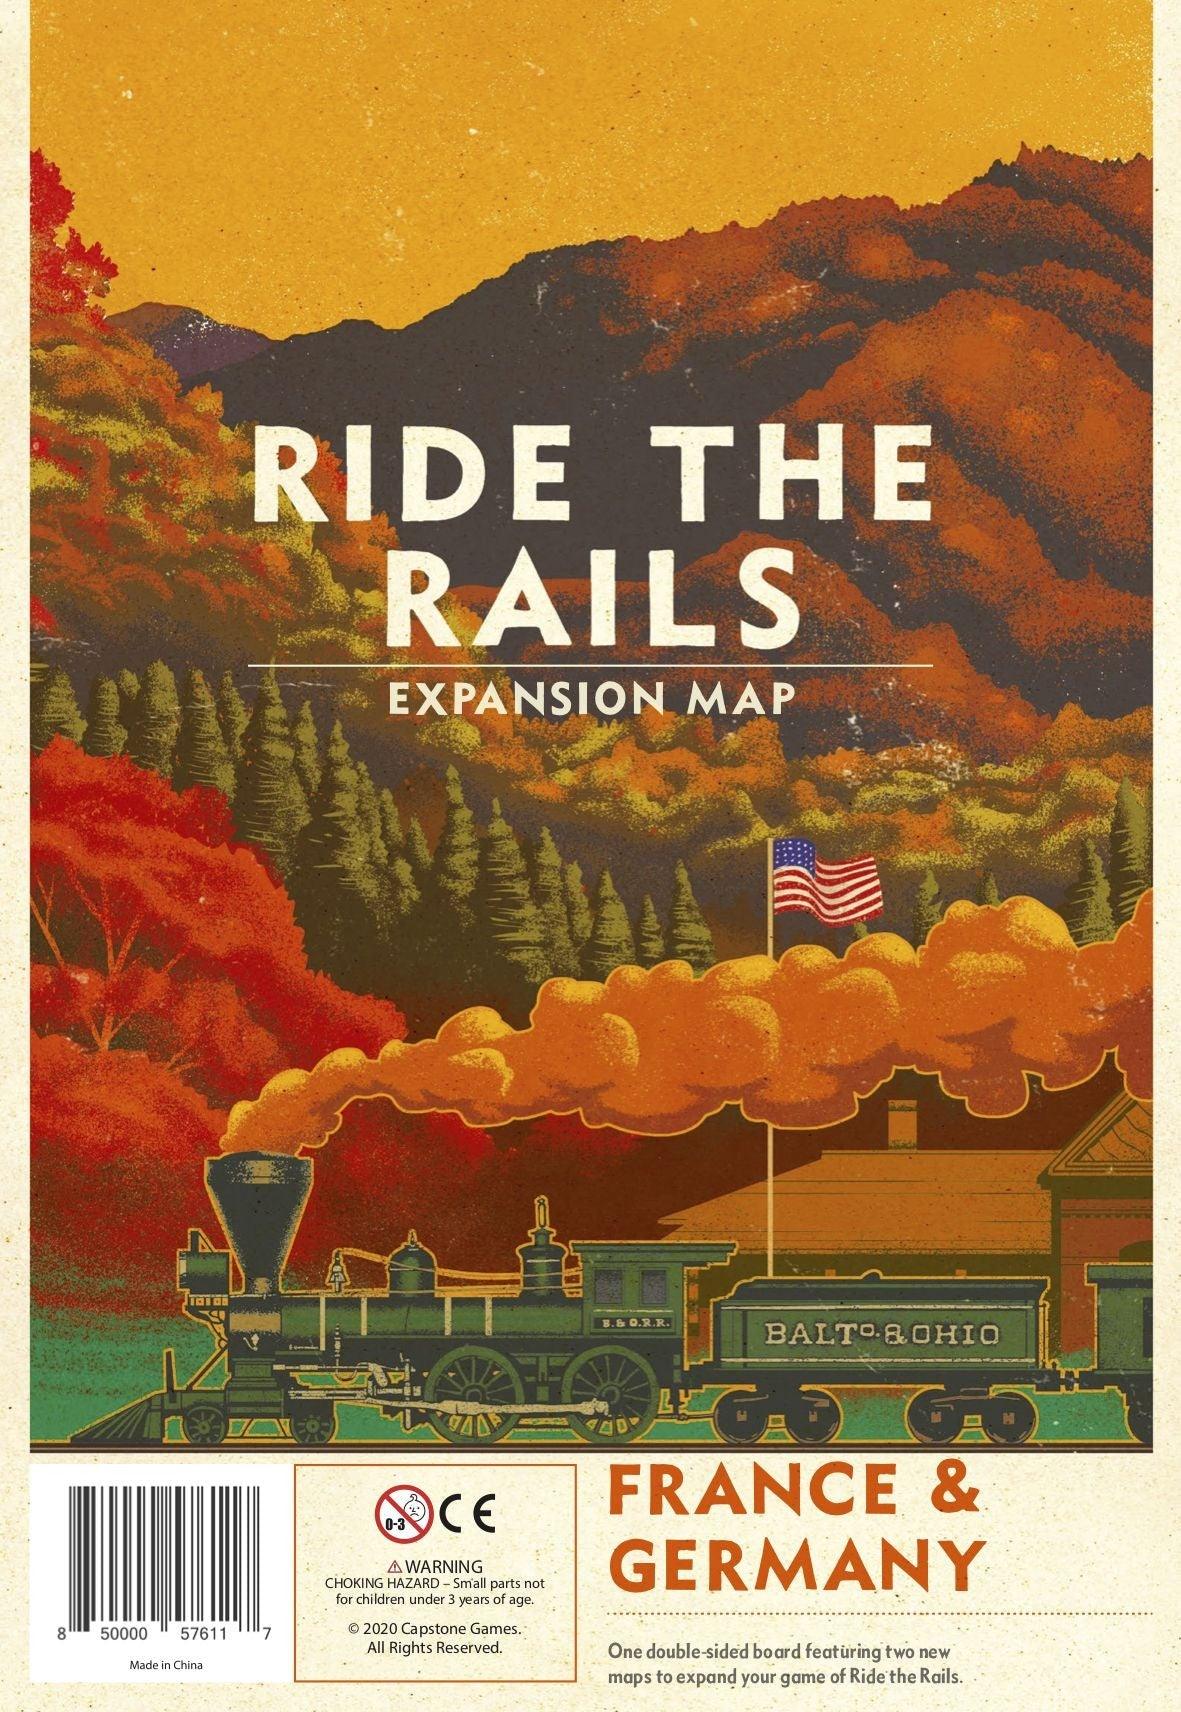 VR-79351 Ride the Rails France and Germany Map - Capstone Games - Titan Pop Culture